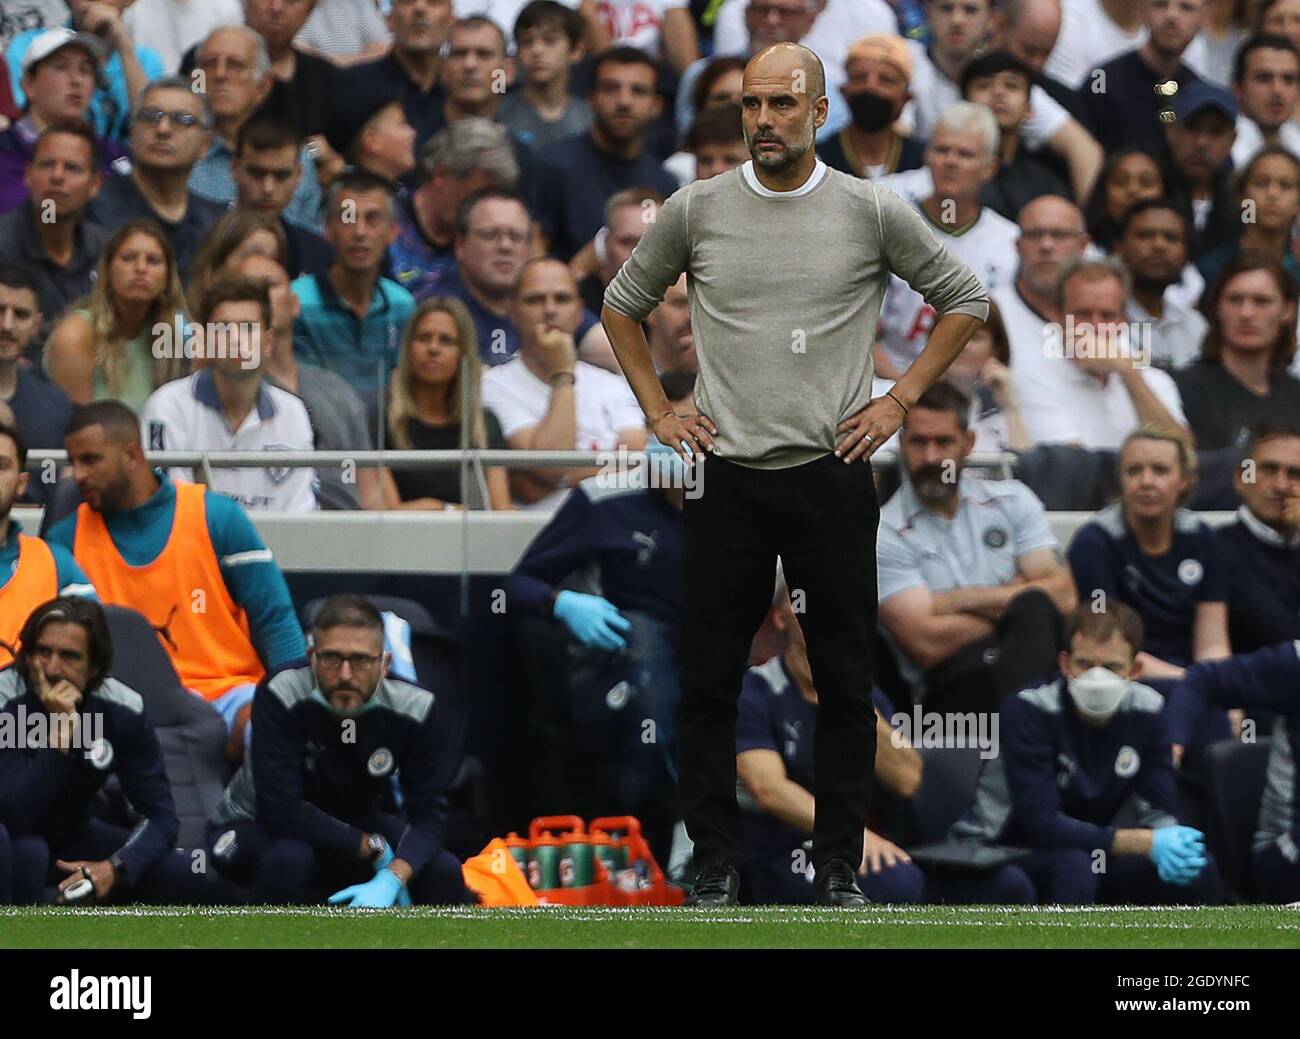 London, England, 15th August 2021. Pep Guardiola, Manager of Manchester City during the Premier League match at the Tottenham Hotspur Stadium, London. Picture credit should read: Paul Terry / Sportimage Stock Photo